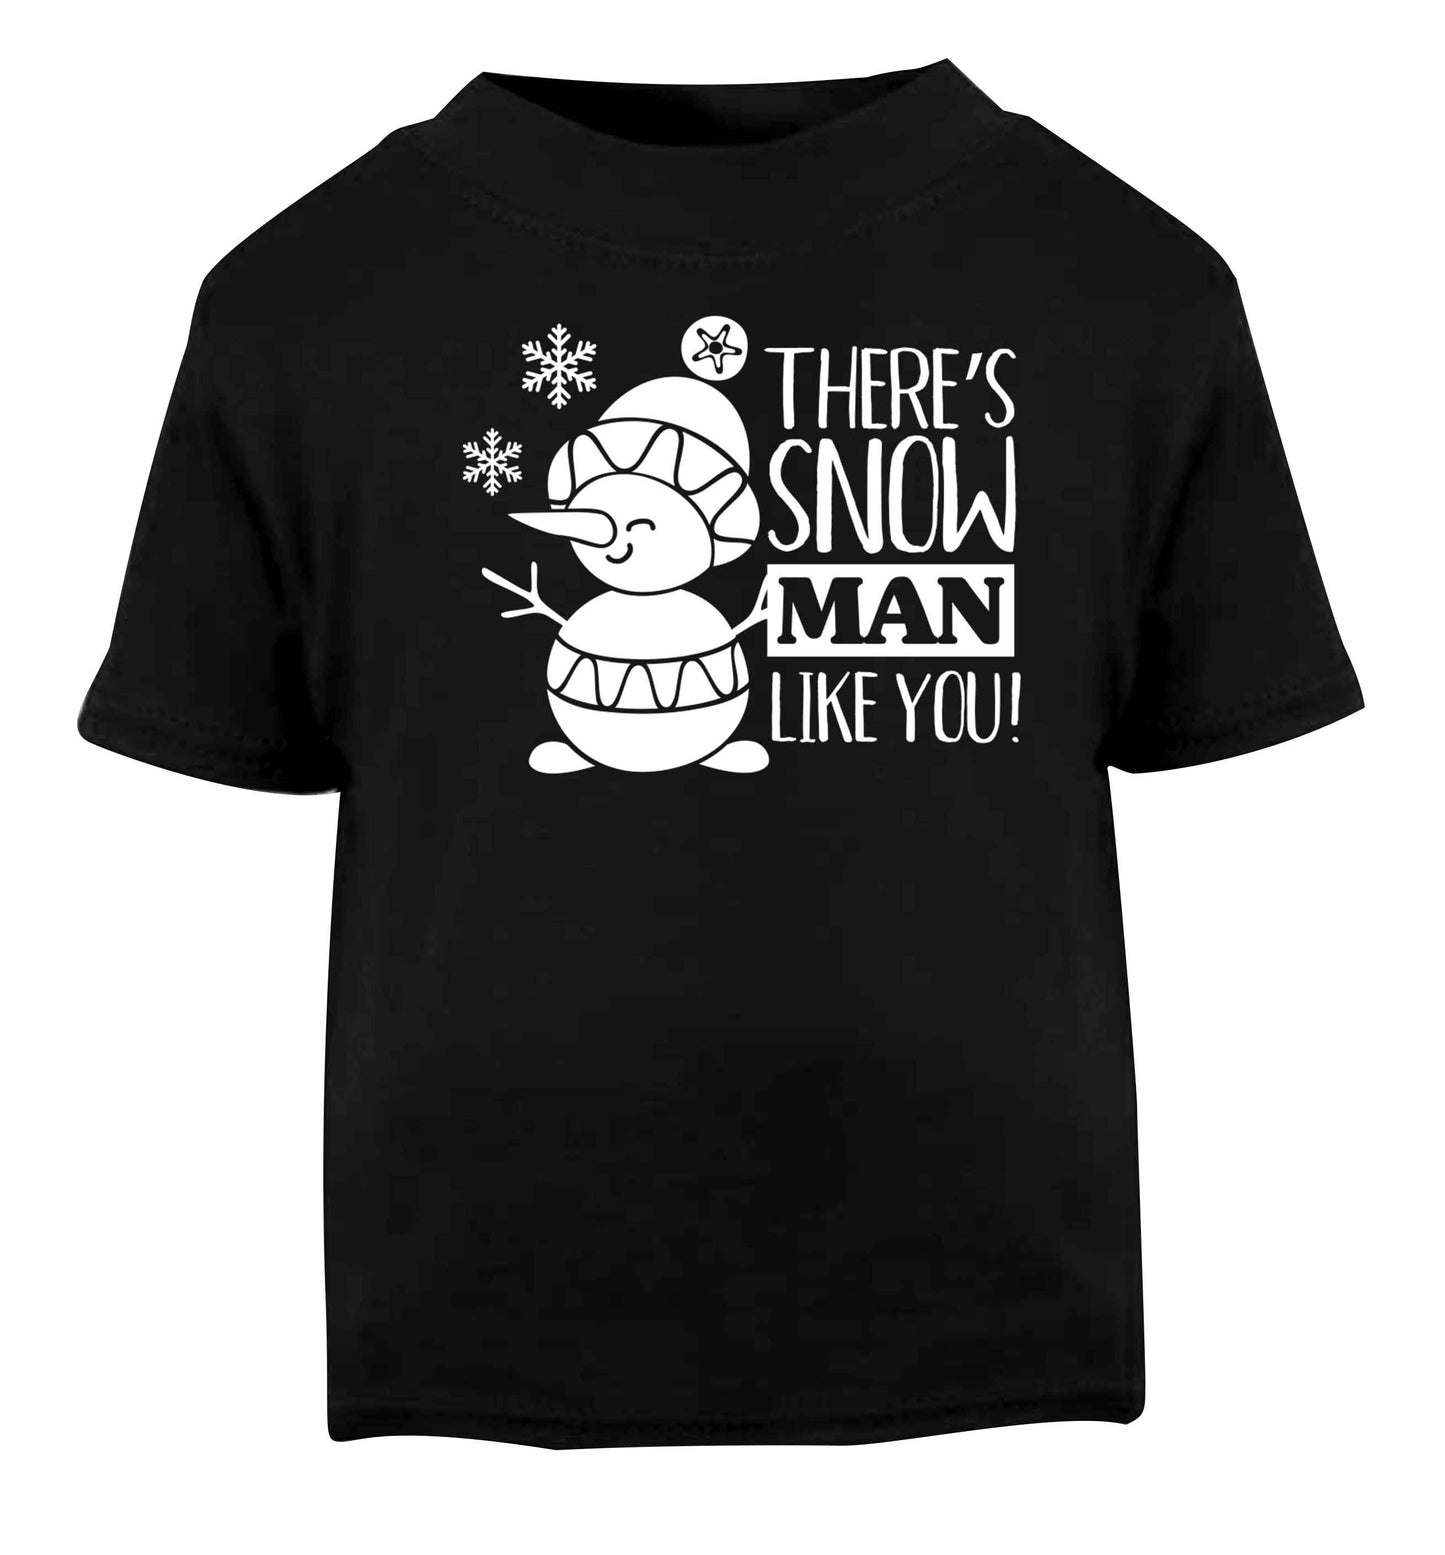 There's snow man like you Black baby toddler Tshirt 2 years